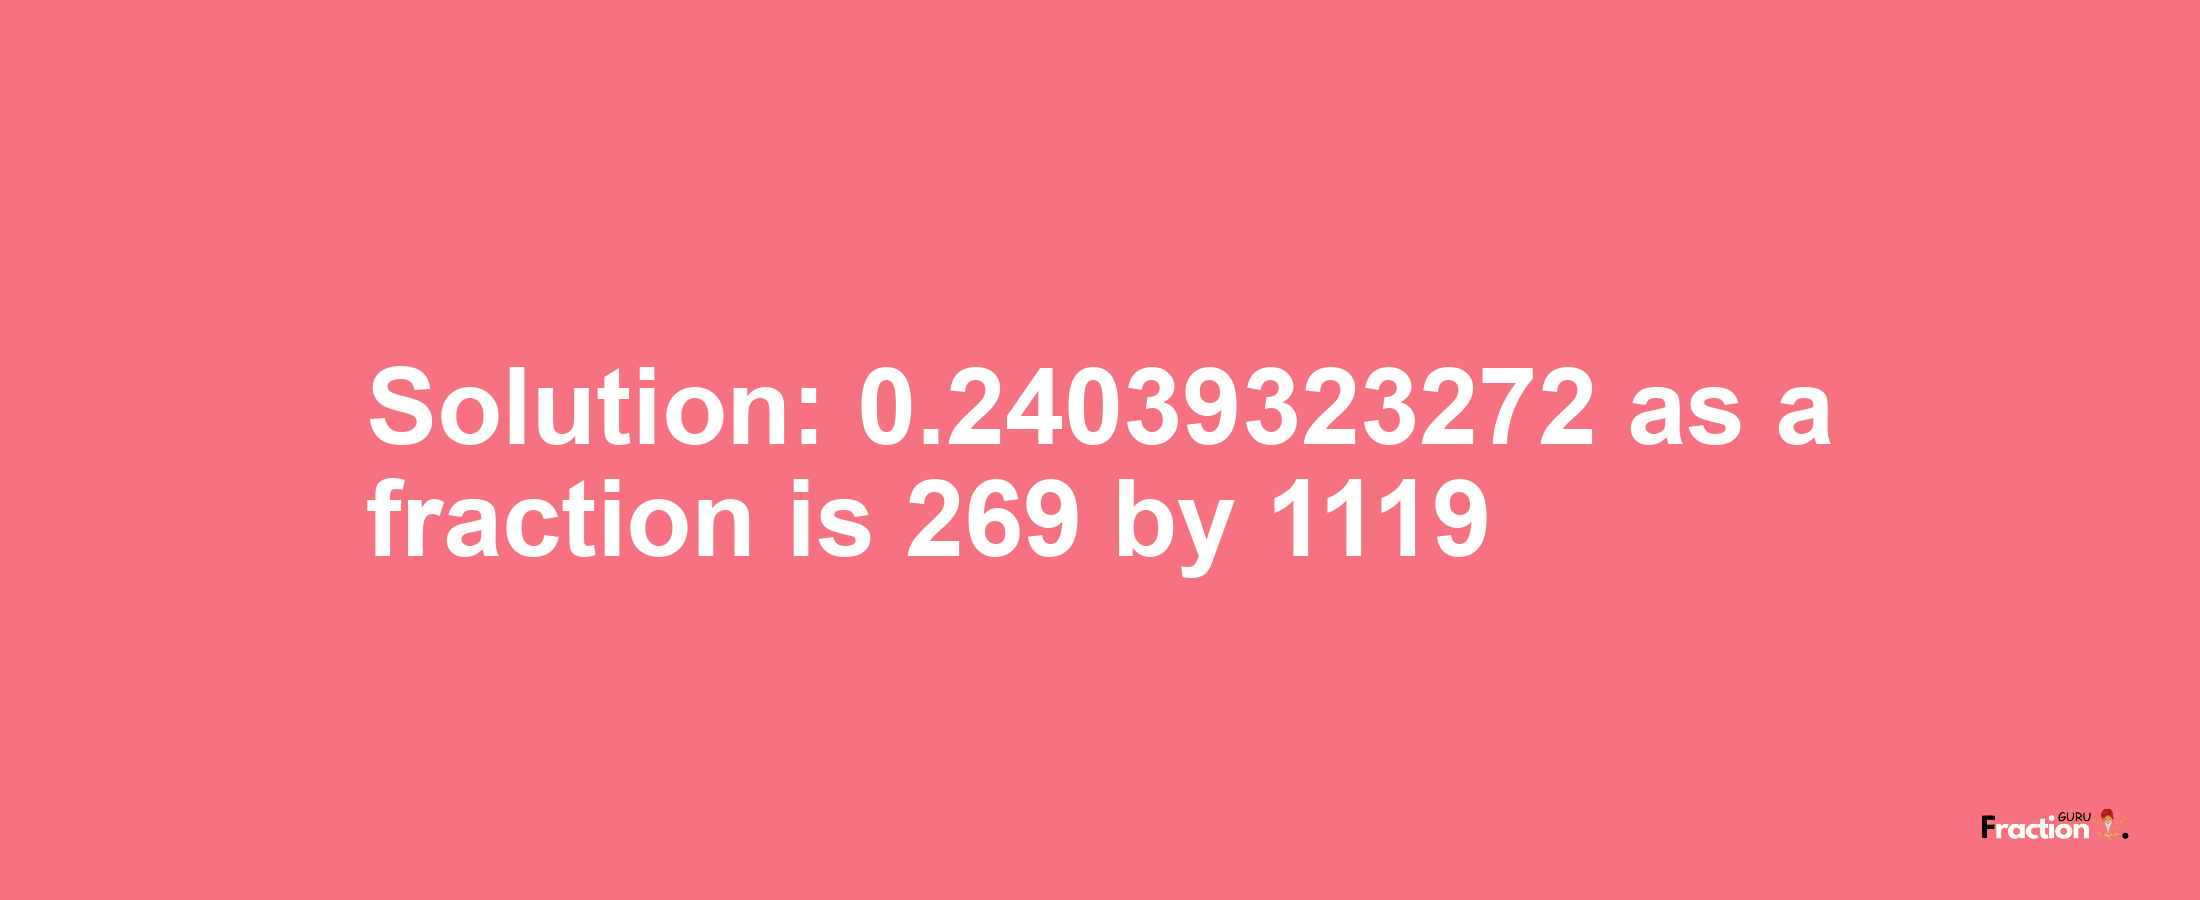 Solution:0.24039323272 as a fraction is 269/1119